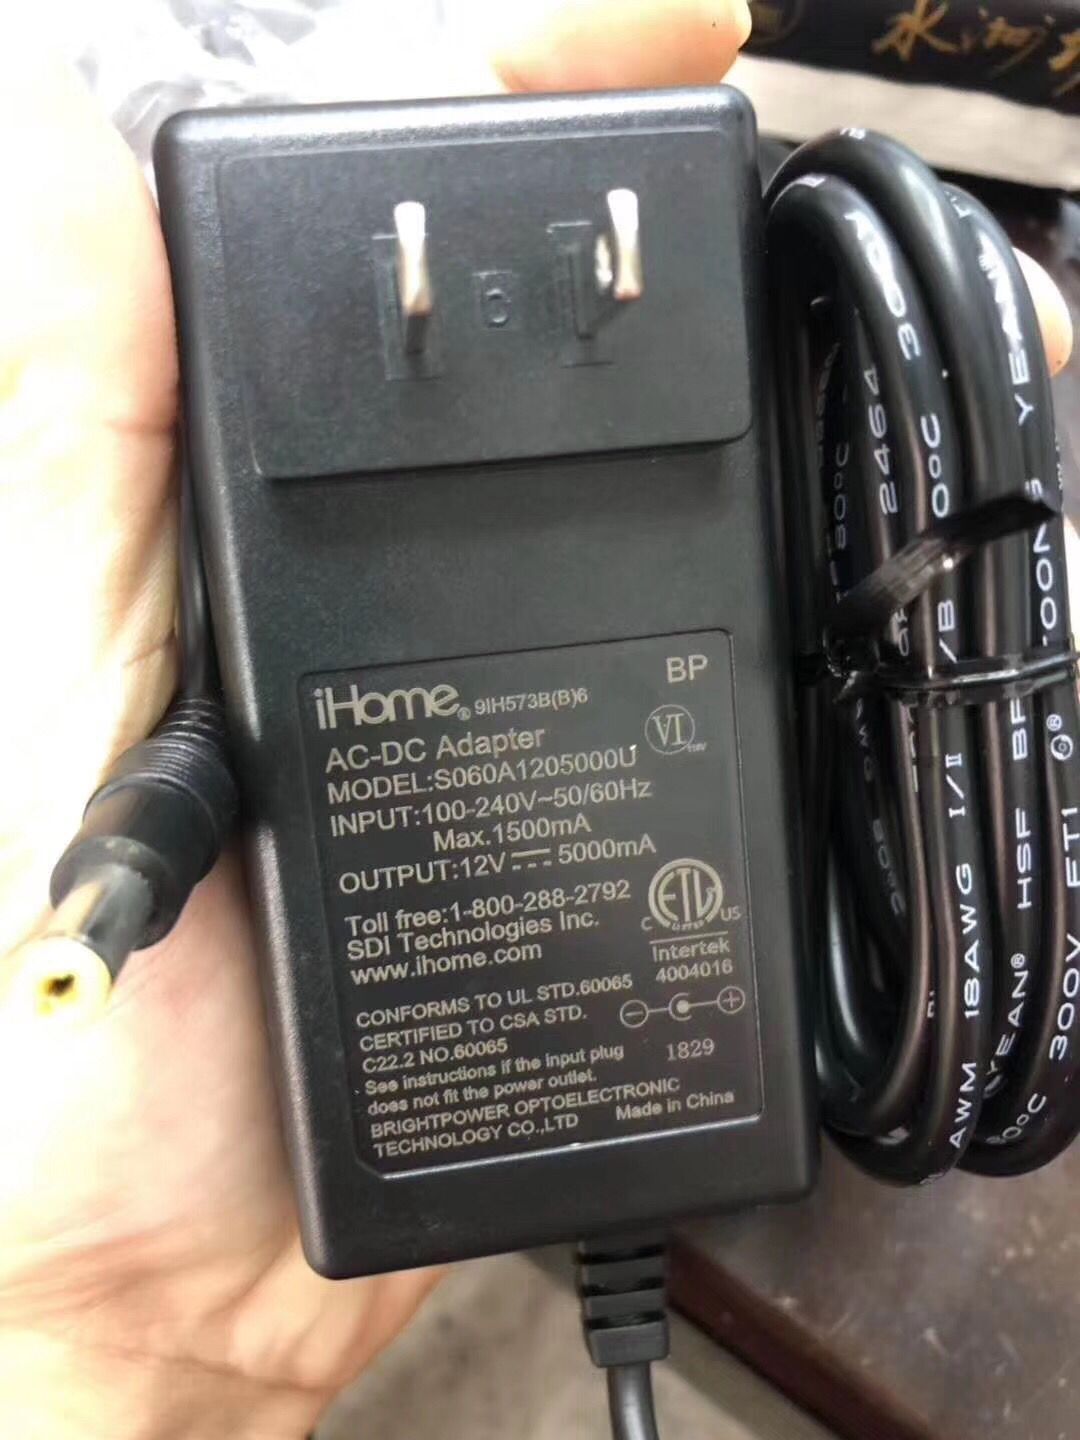 *NEW* iHome S060A1205000U 12V 5000mA AC DC Adapter POWER SUPPLY - Click Image to Close